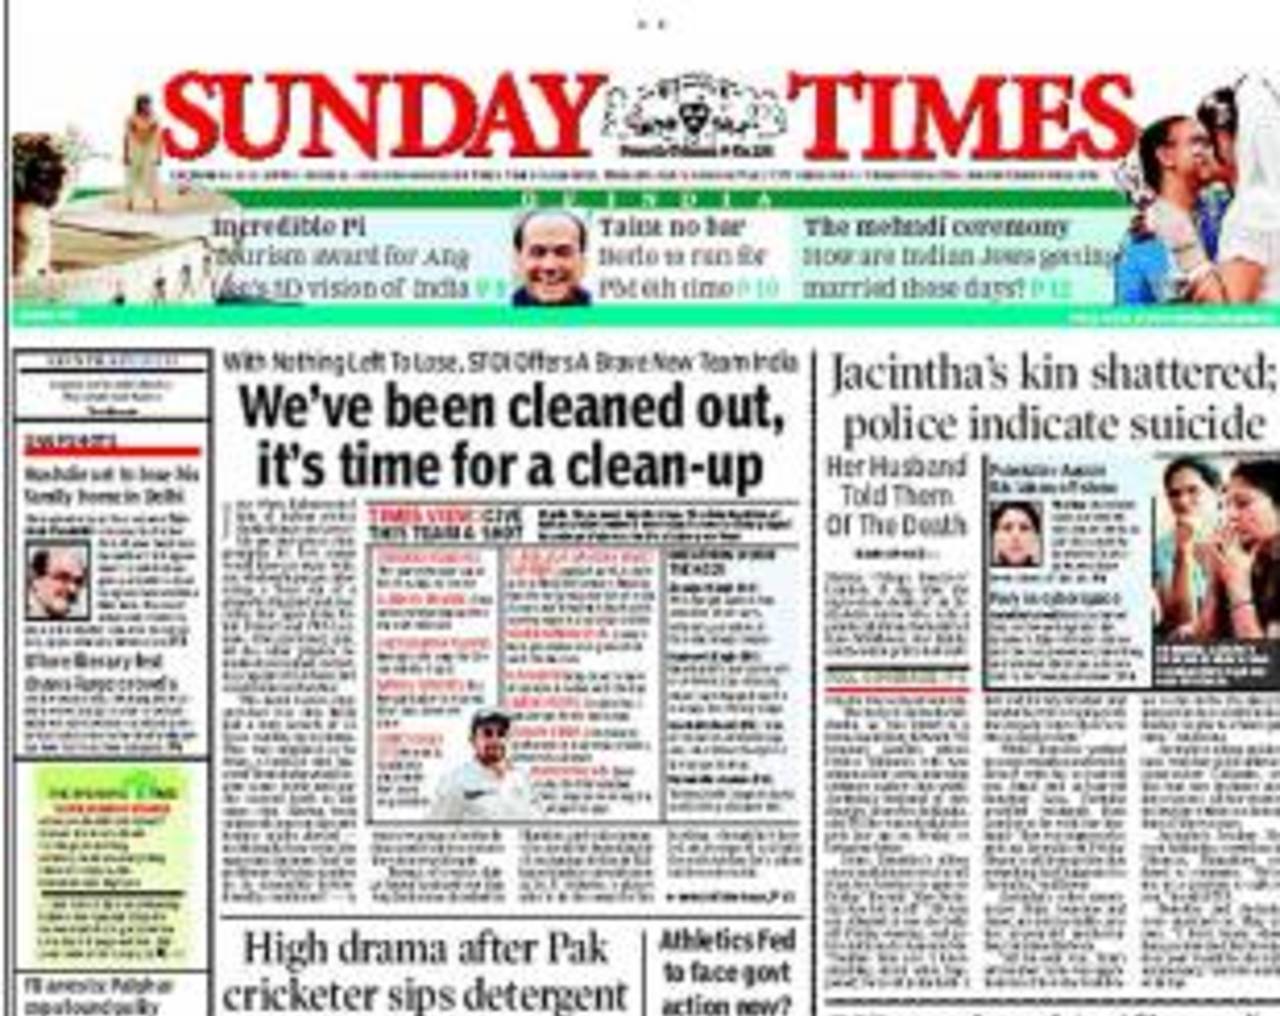 The front-page headline in the <i>Sunday Times of India</i>&nbsp;&nbsp;&bull;&nbsp;&nbsp;Sunday Times of India